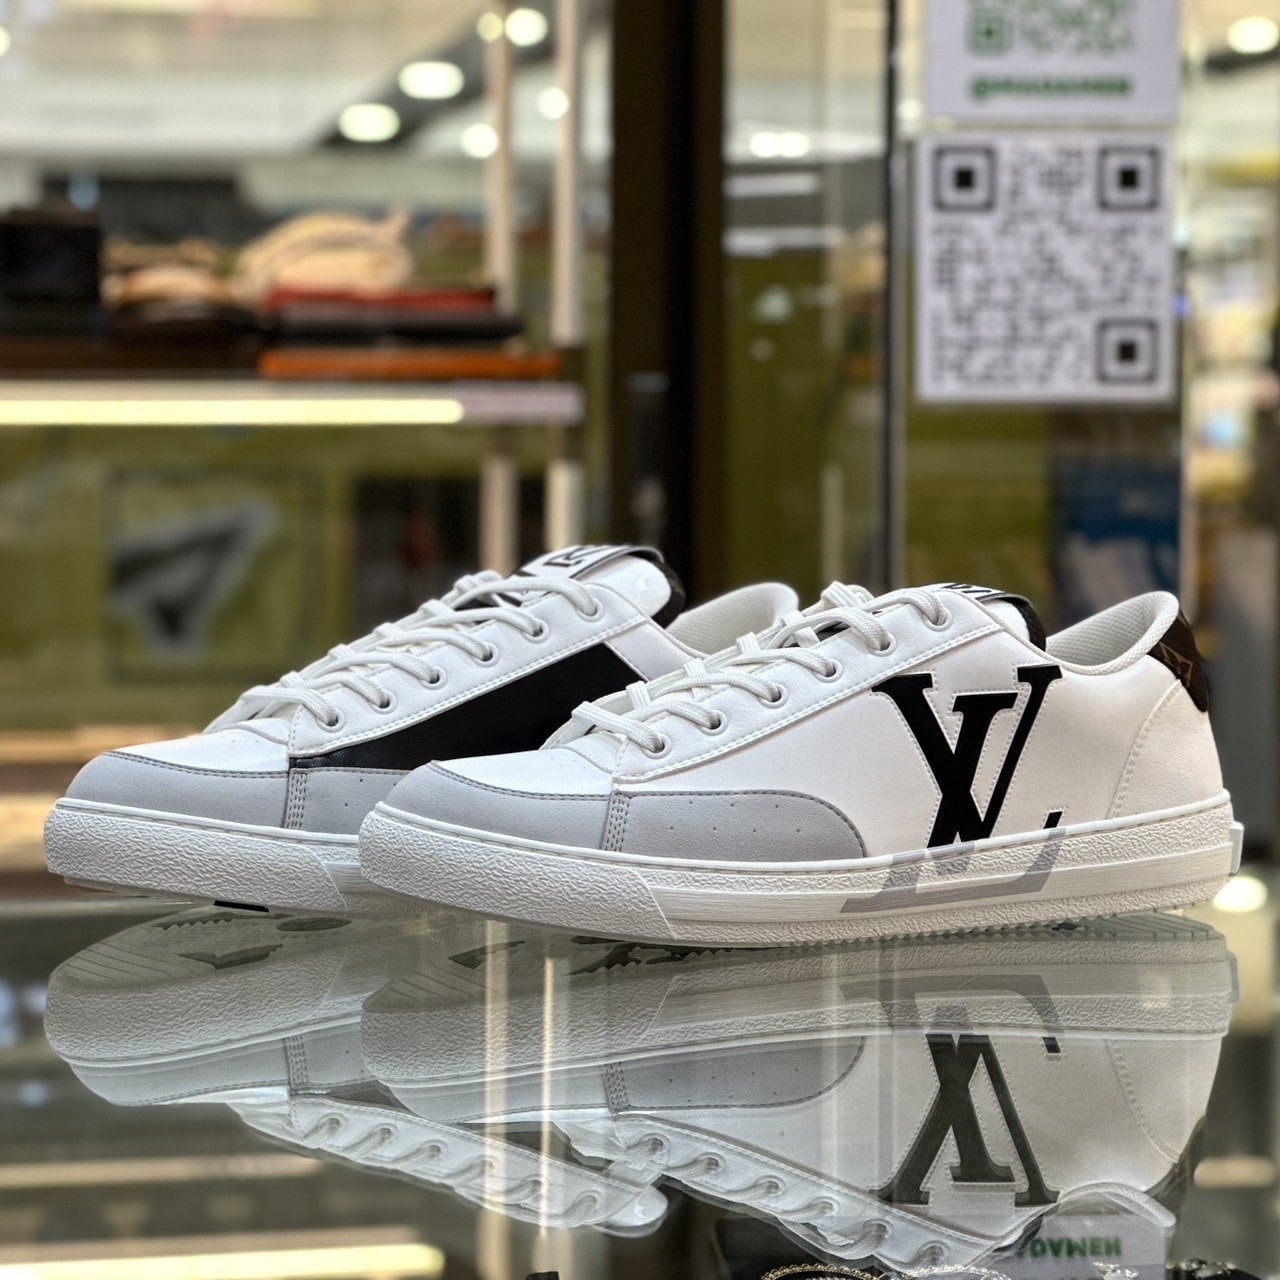 Louis Vuitton Charlie Sneaker Cacao. Size 34.0